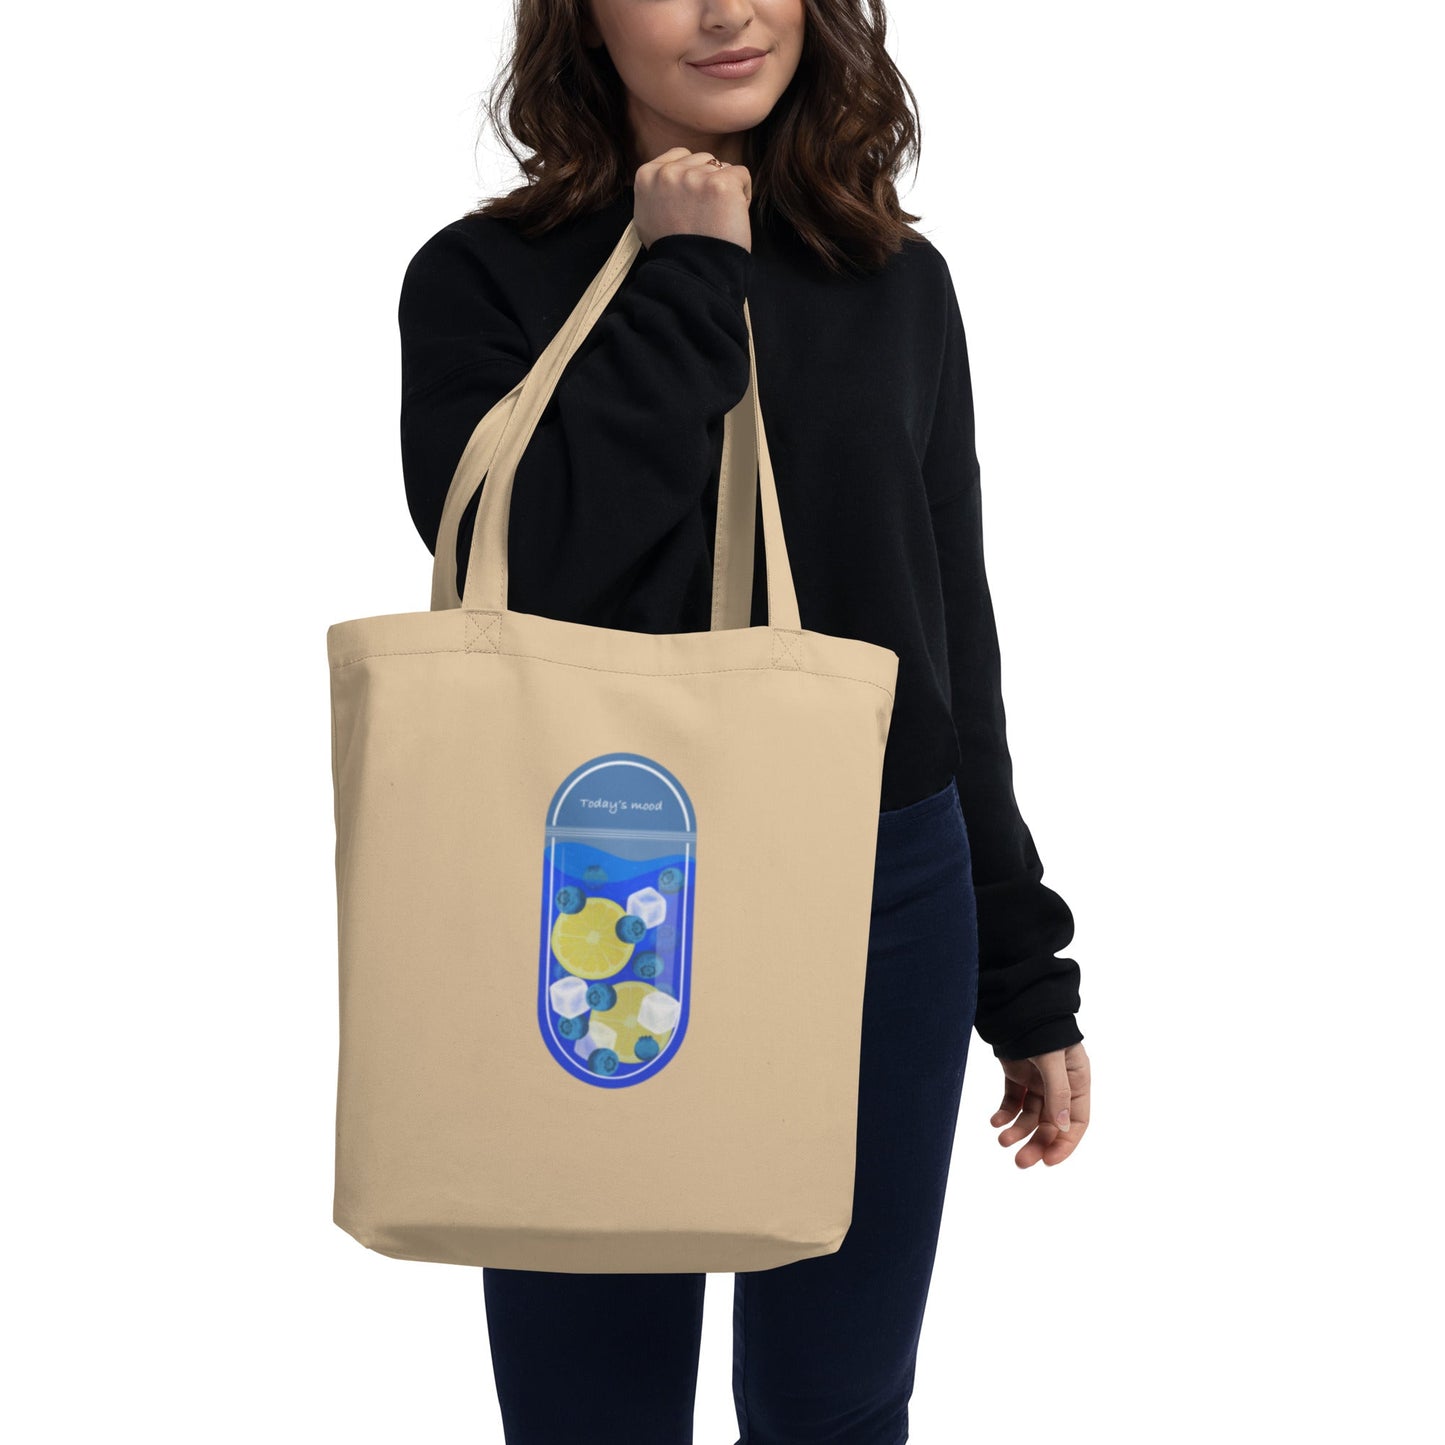 eco-tote-bag-todays-mood-15-oyster